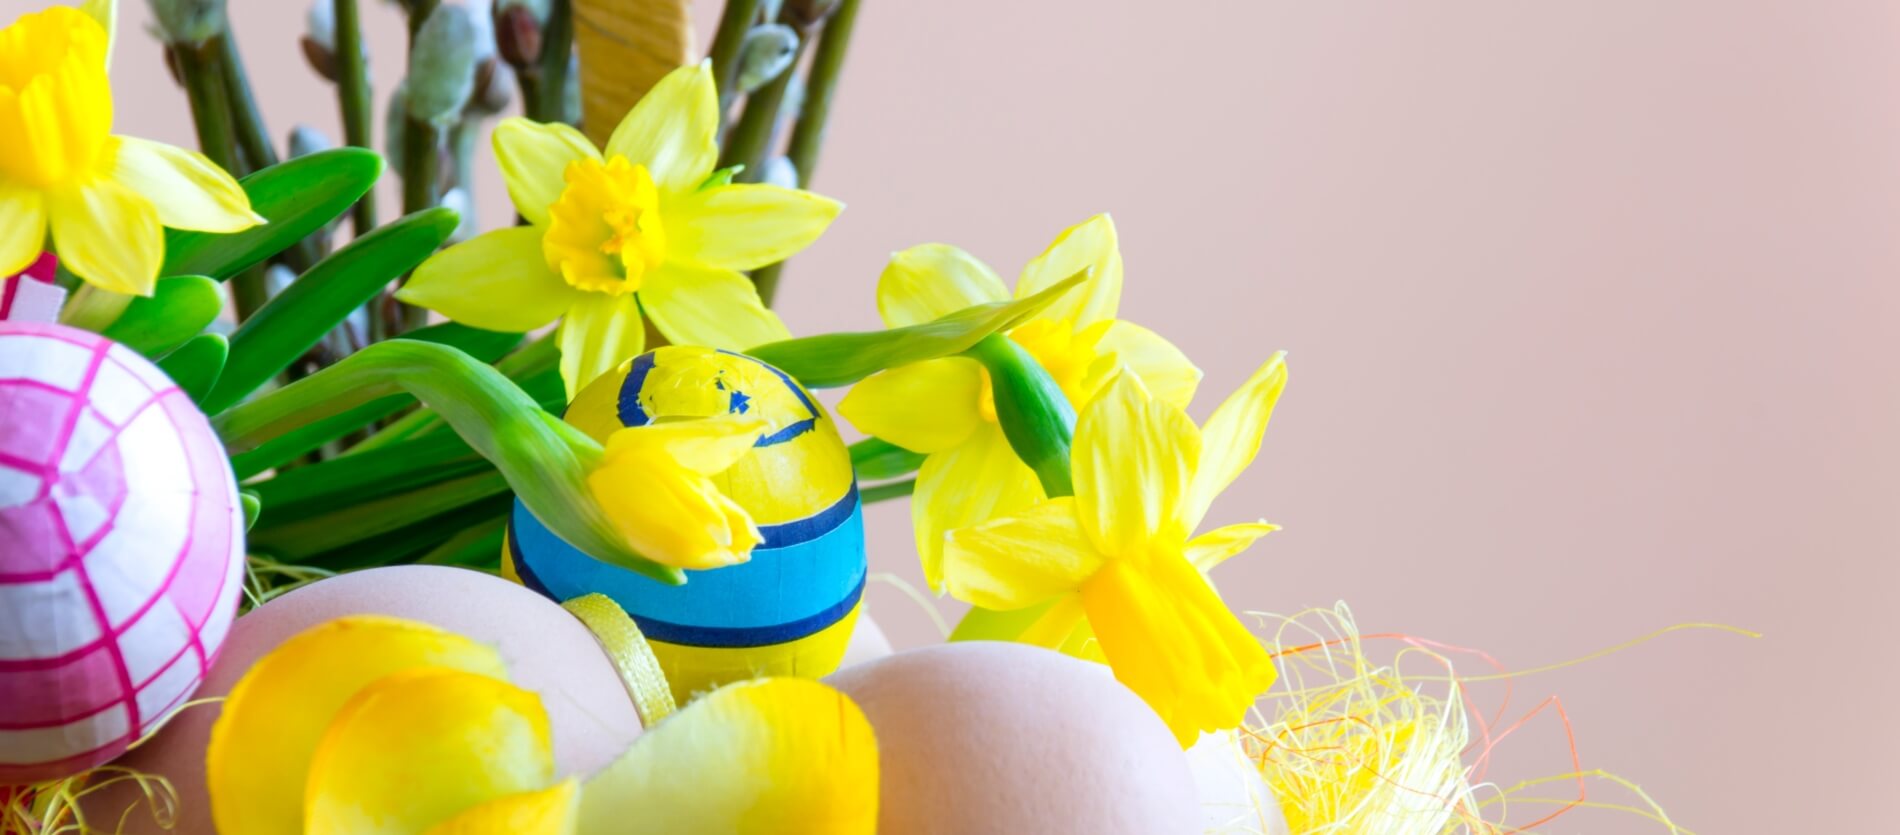 Easter themed setting of yellow daffodils and decorative eggs